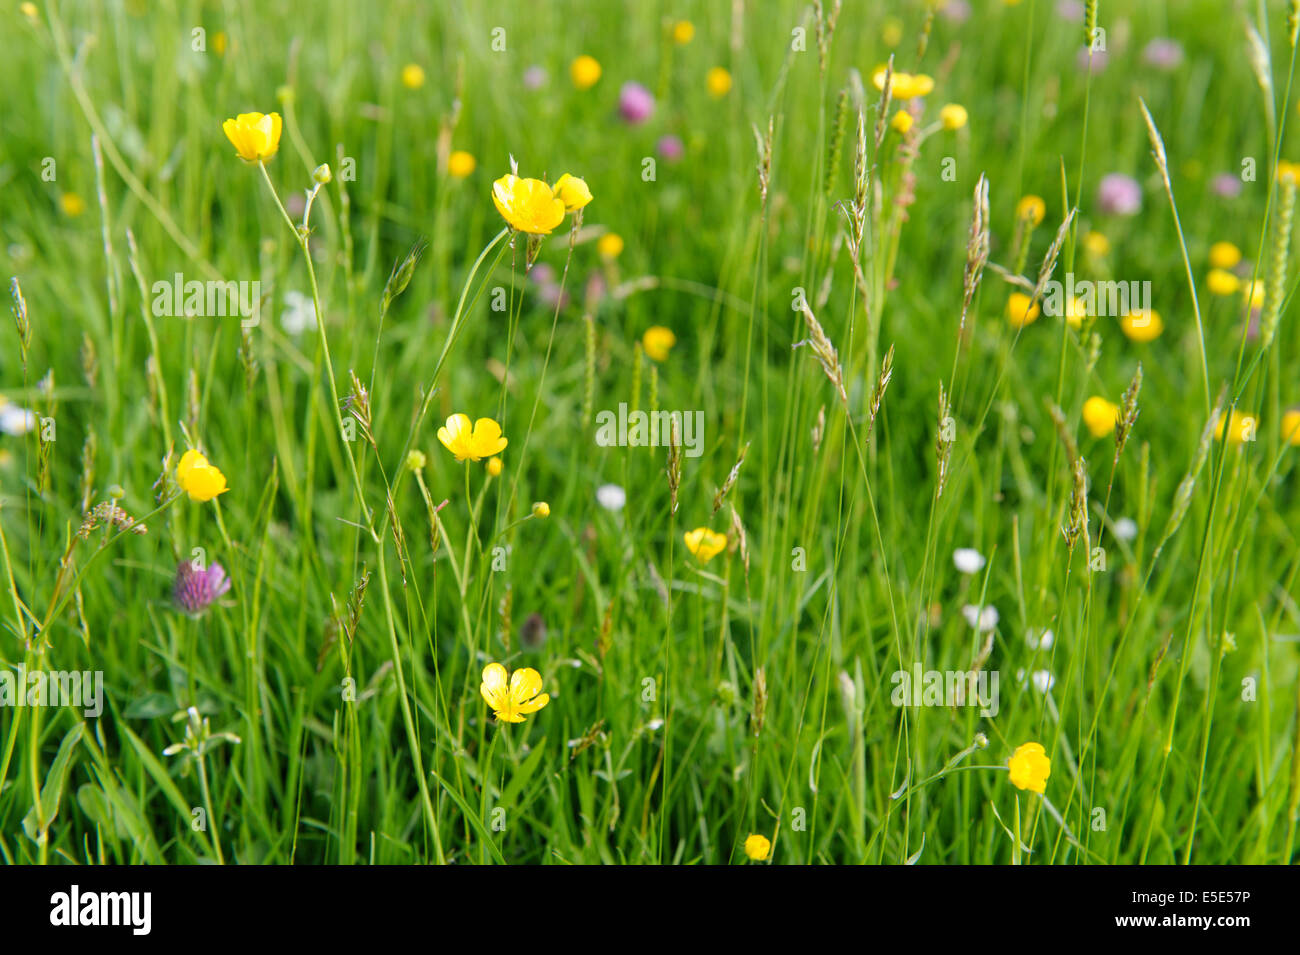 Wild meadow flowers and grasses in Powys, Wales Stock Photo